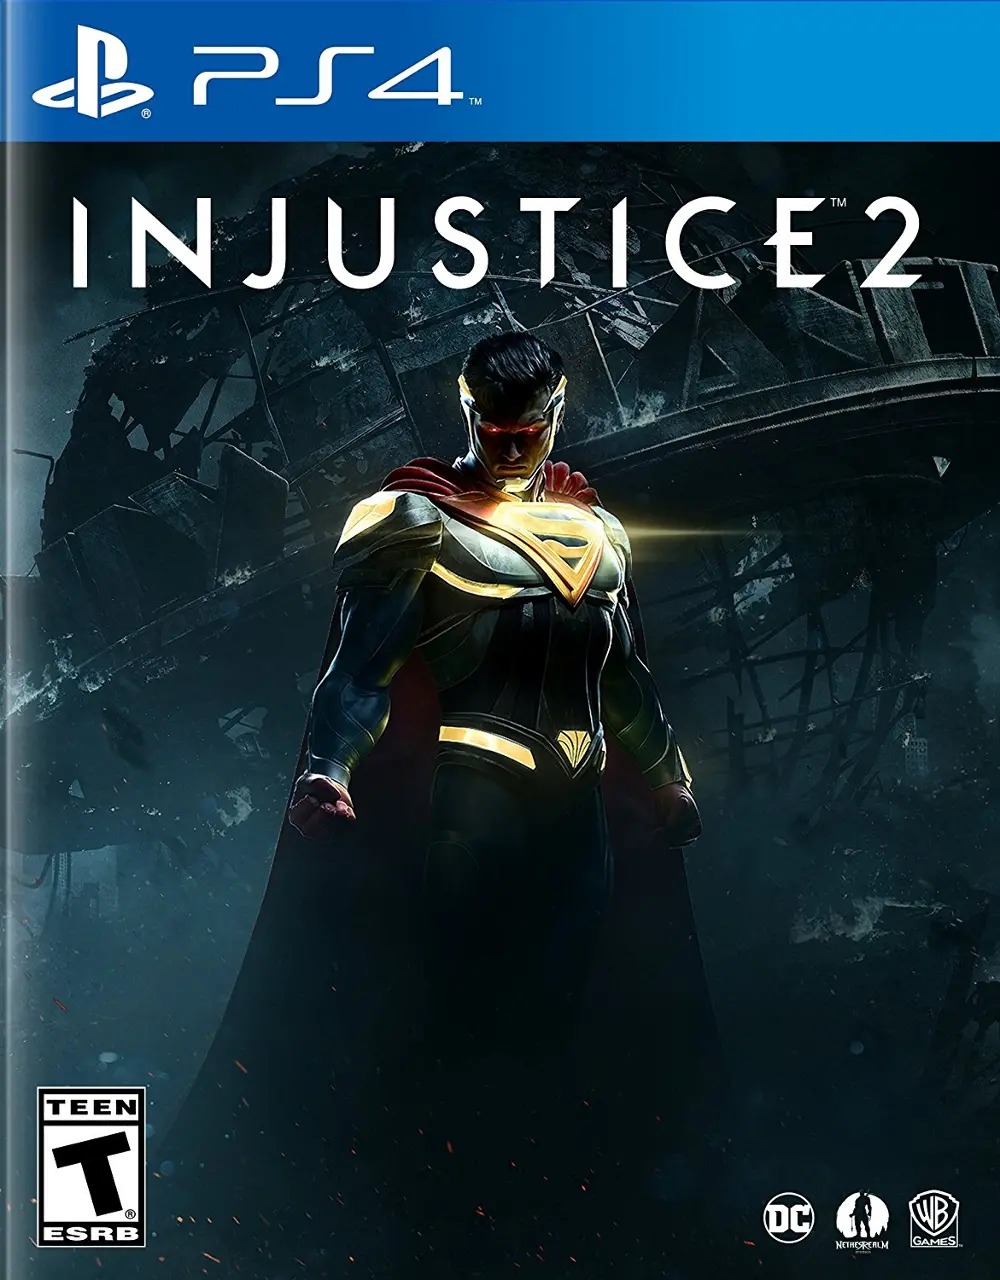 PS4/INJUSTICE_2 Injustice 2 - PS4-1